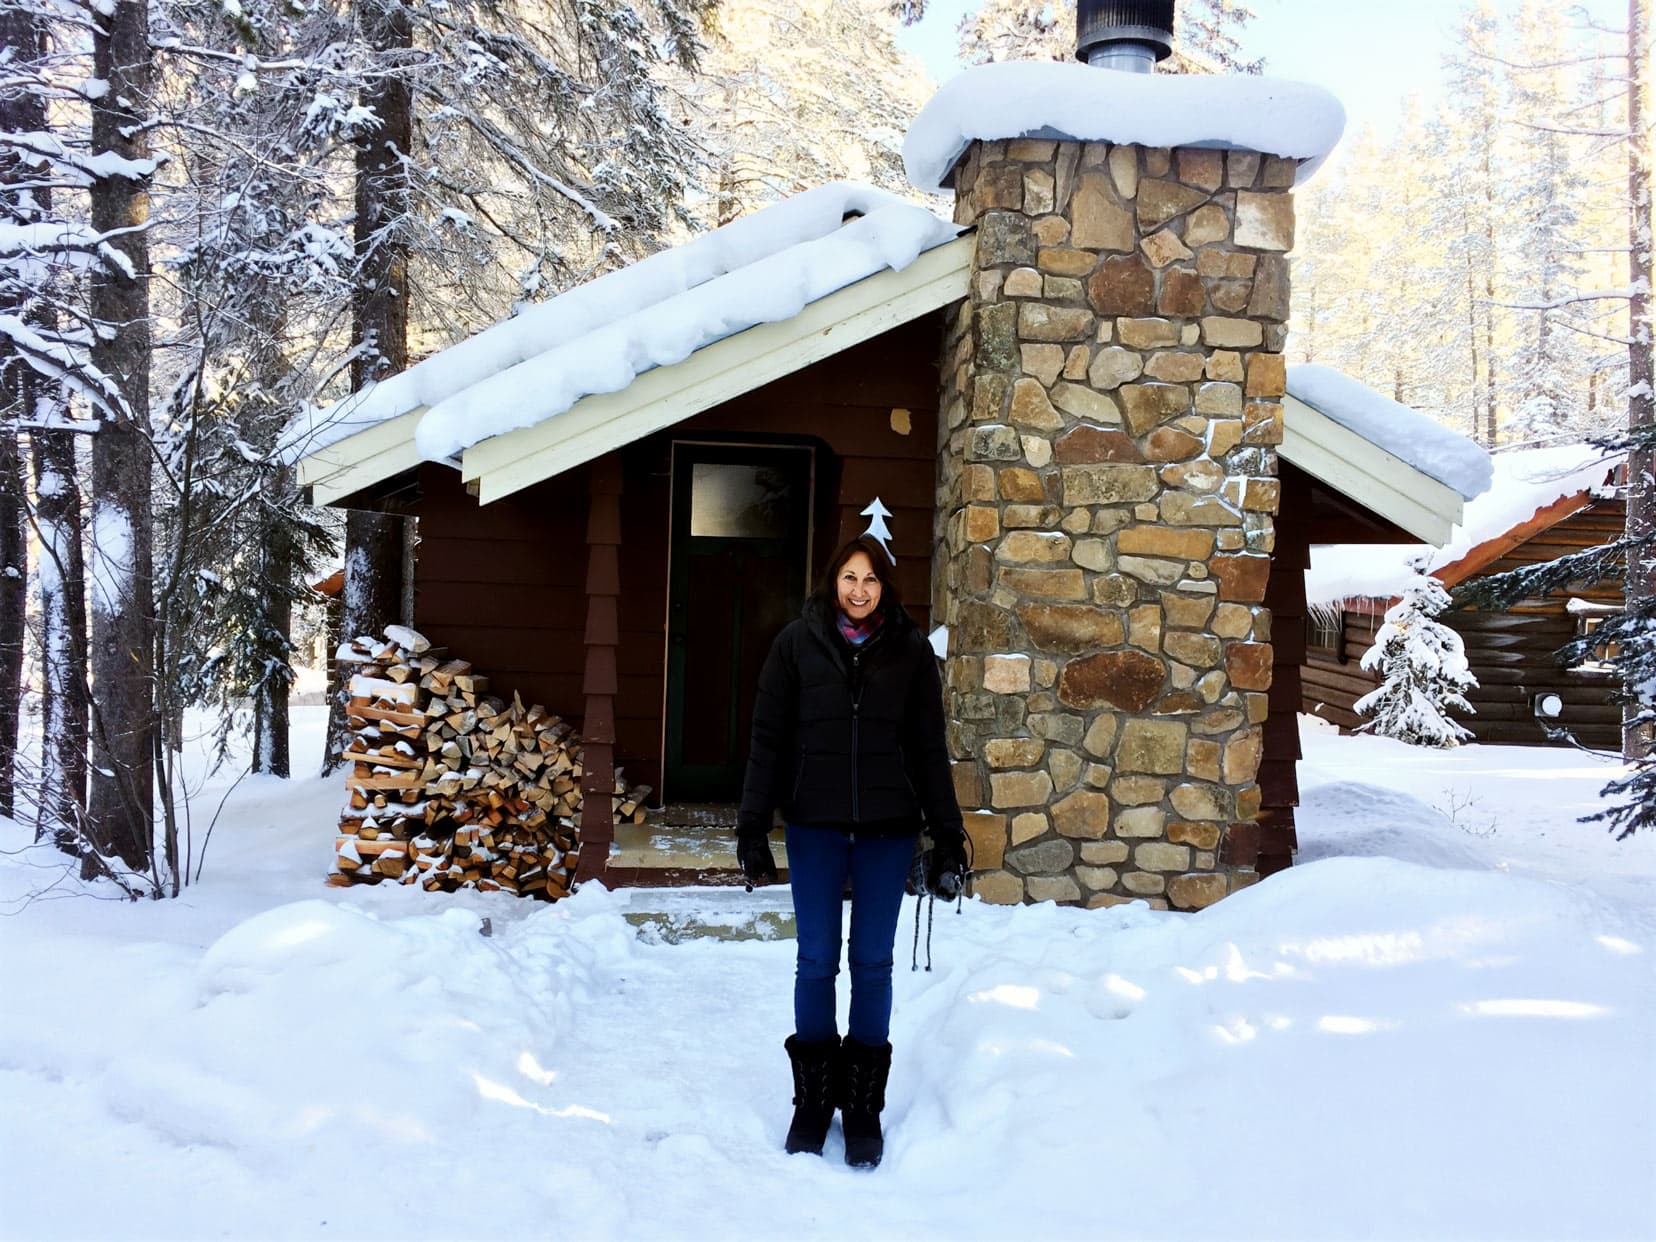 Shelley stood outside the log cabin in the snow Banff National Park, wearing snow boots.